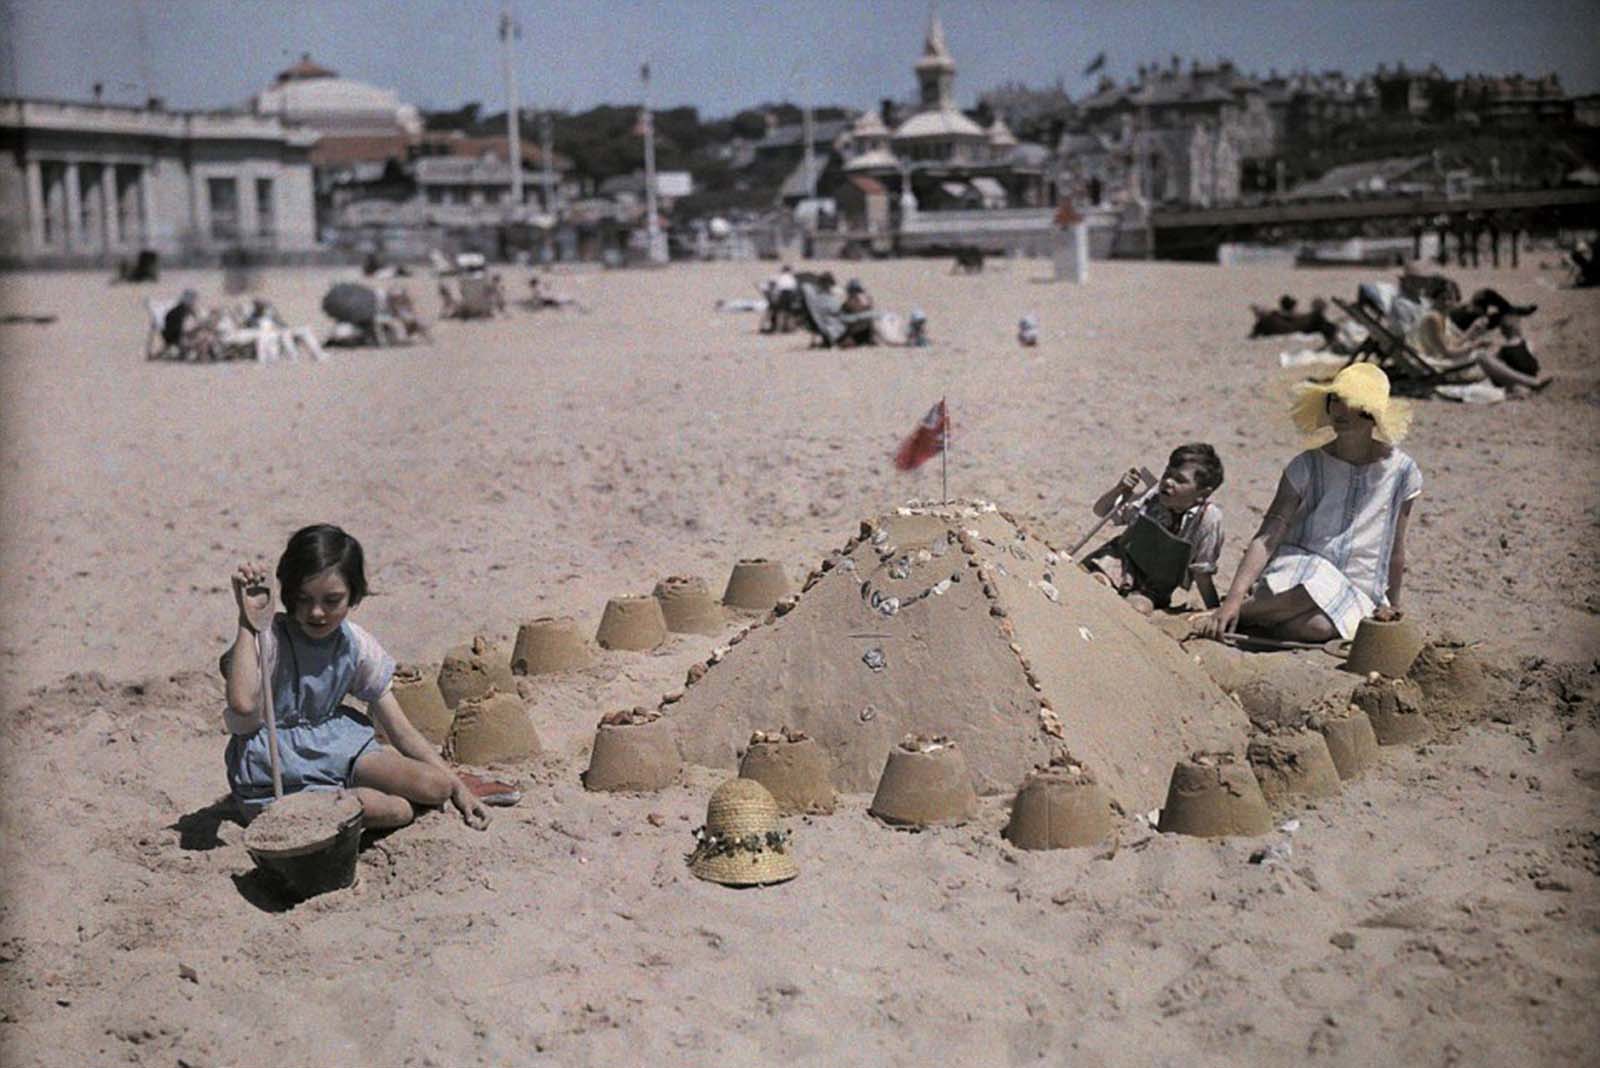 A family builds a sandcastle at the seaside resort of Sandbourne, near Bournemouth in Dorset.